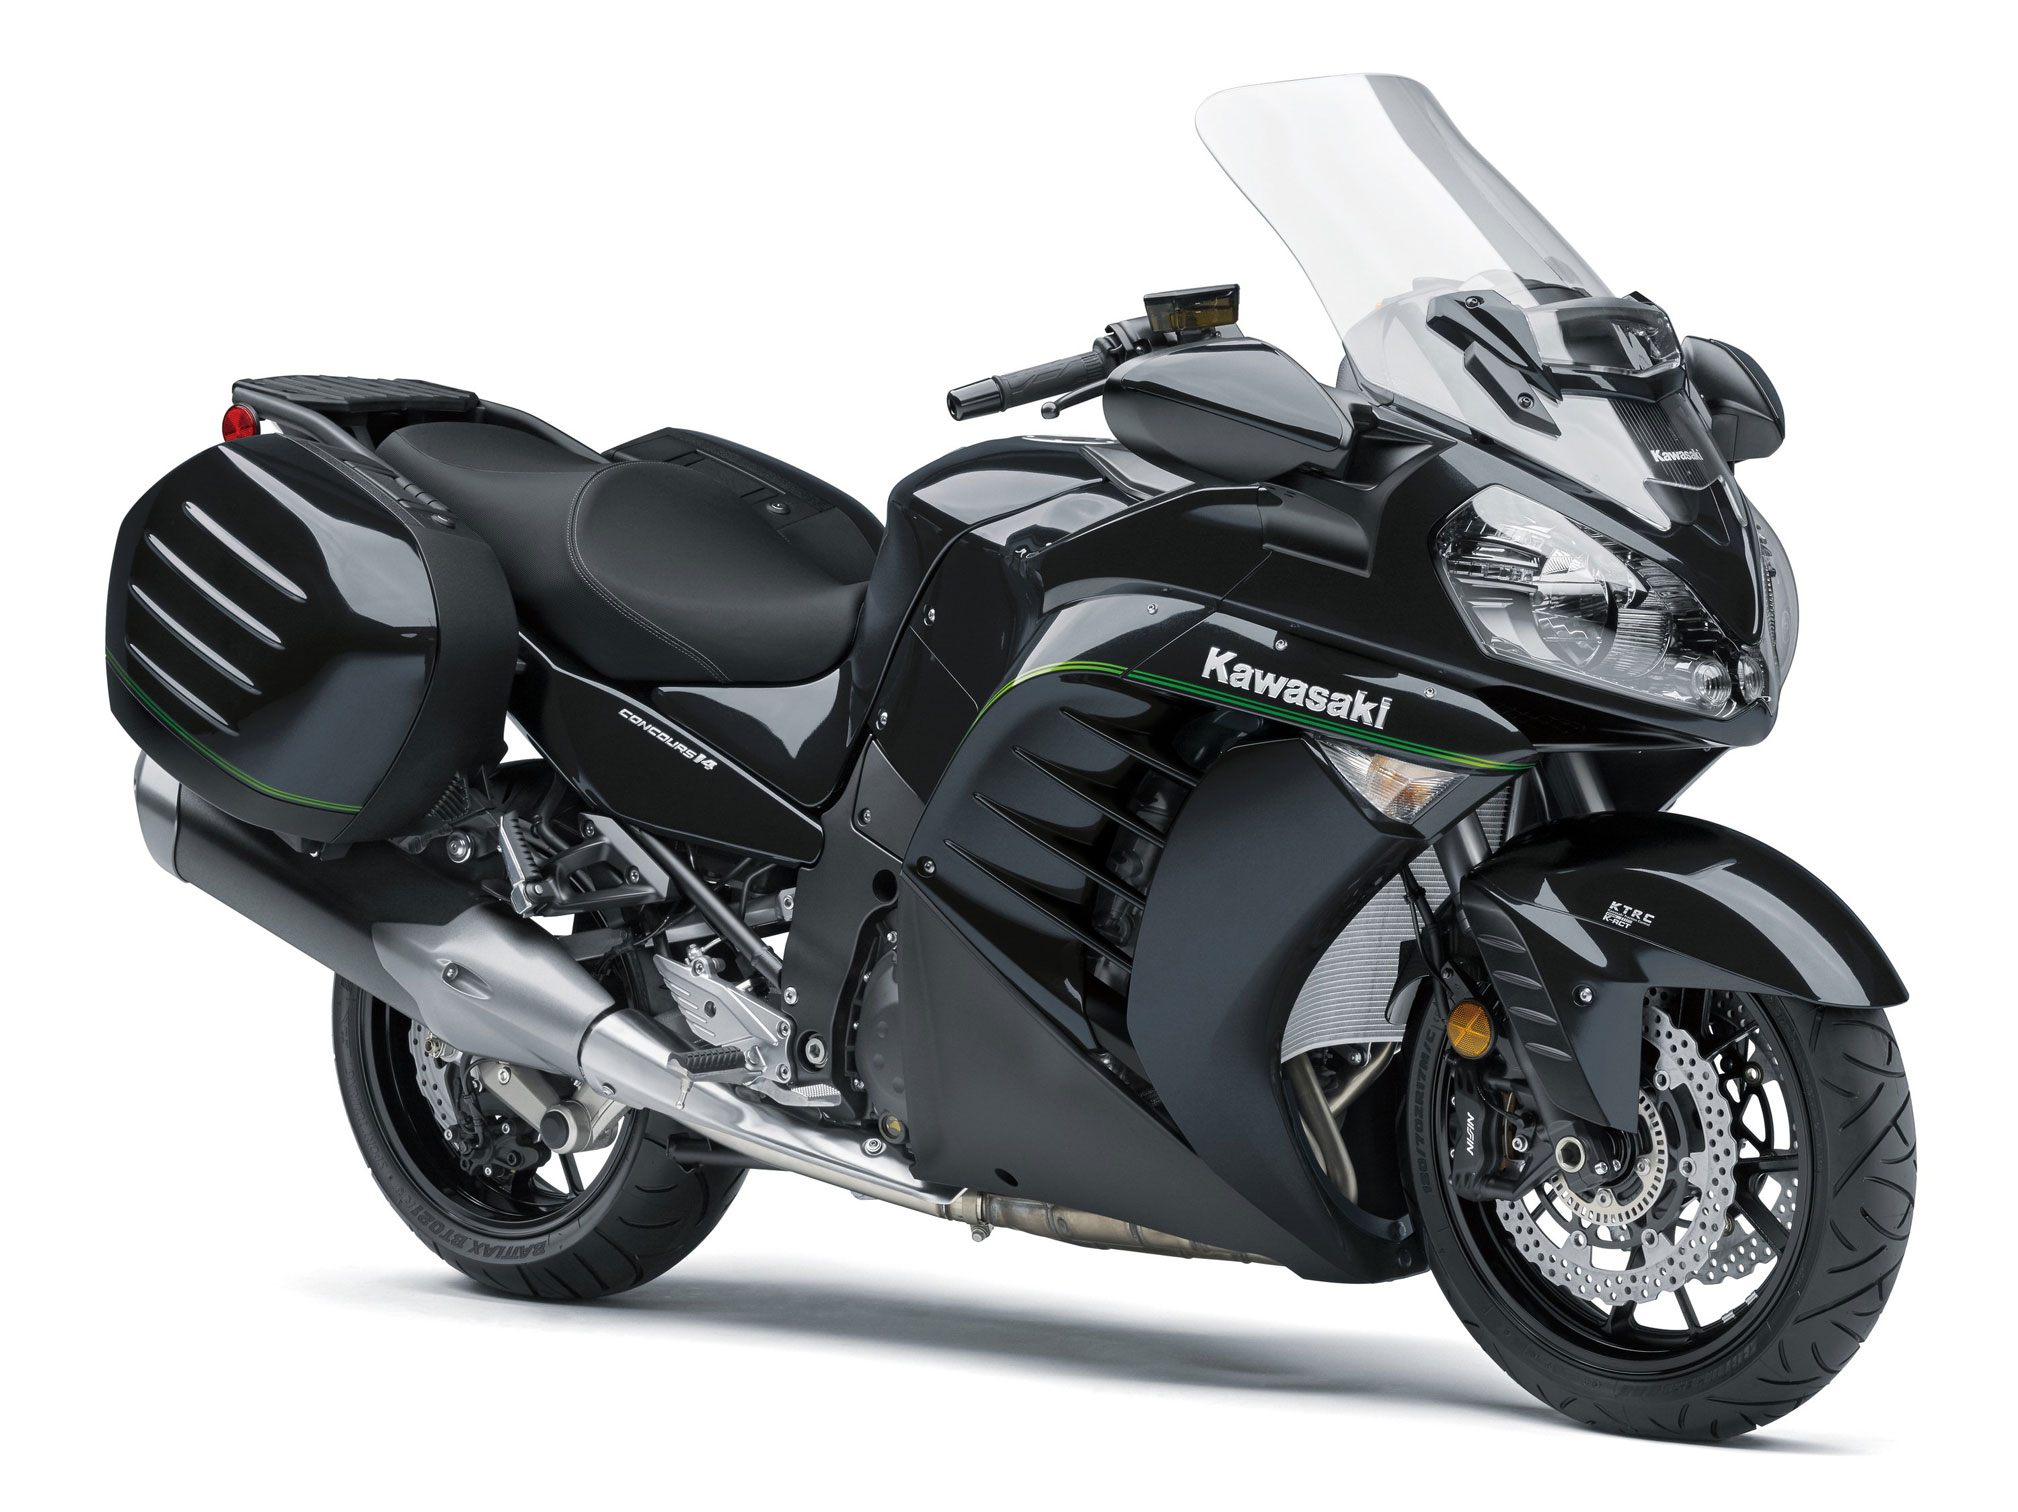 2018 Kawasaki Concours 14 ABS Review Total Motorcycle